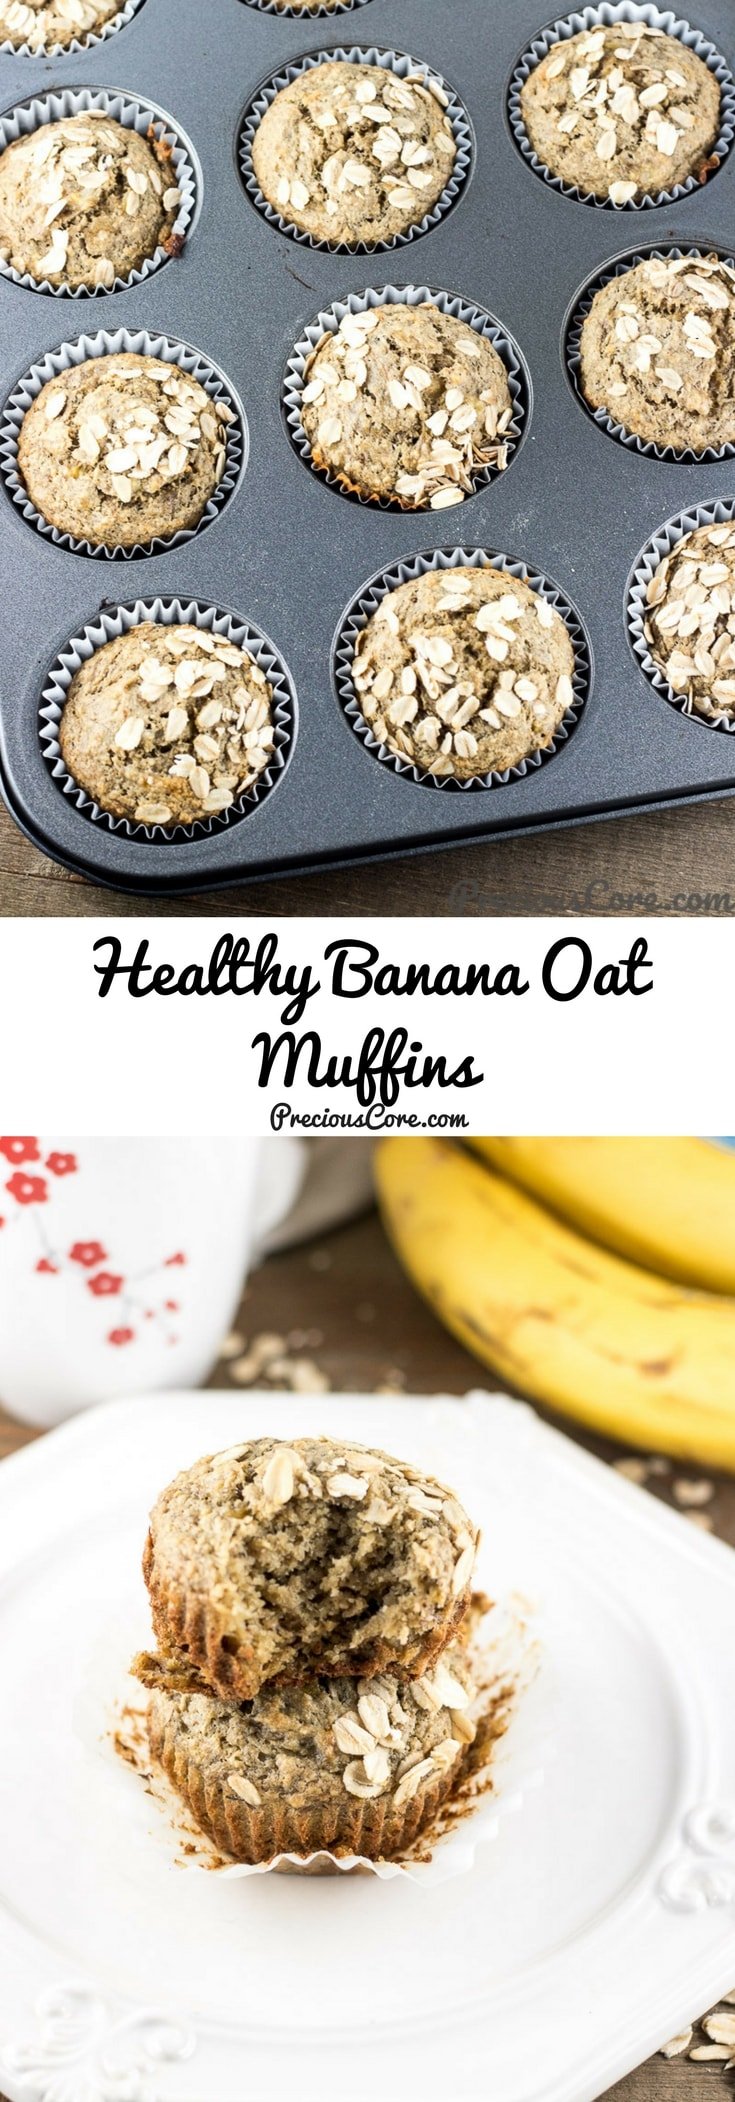 Healthy Banana Oat Muffins that are so tasty and do not taste healthy at all. Also, they do not contain any regular flour. Enjoy these for breakfast or for snack time. The recipe is so simple, requiring only one bowl and 7 simple ingredients. Get the recipe on Precious Core. #Healthy #Baking #GlutenFree #Muffins